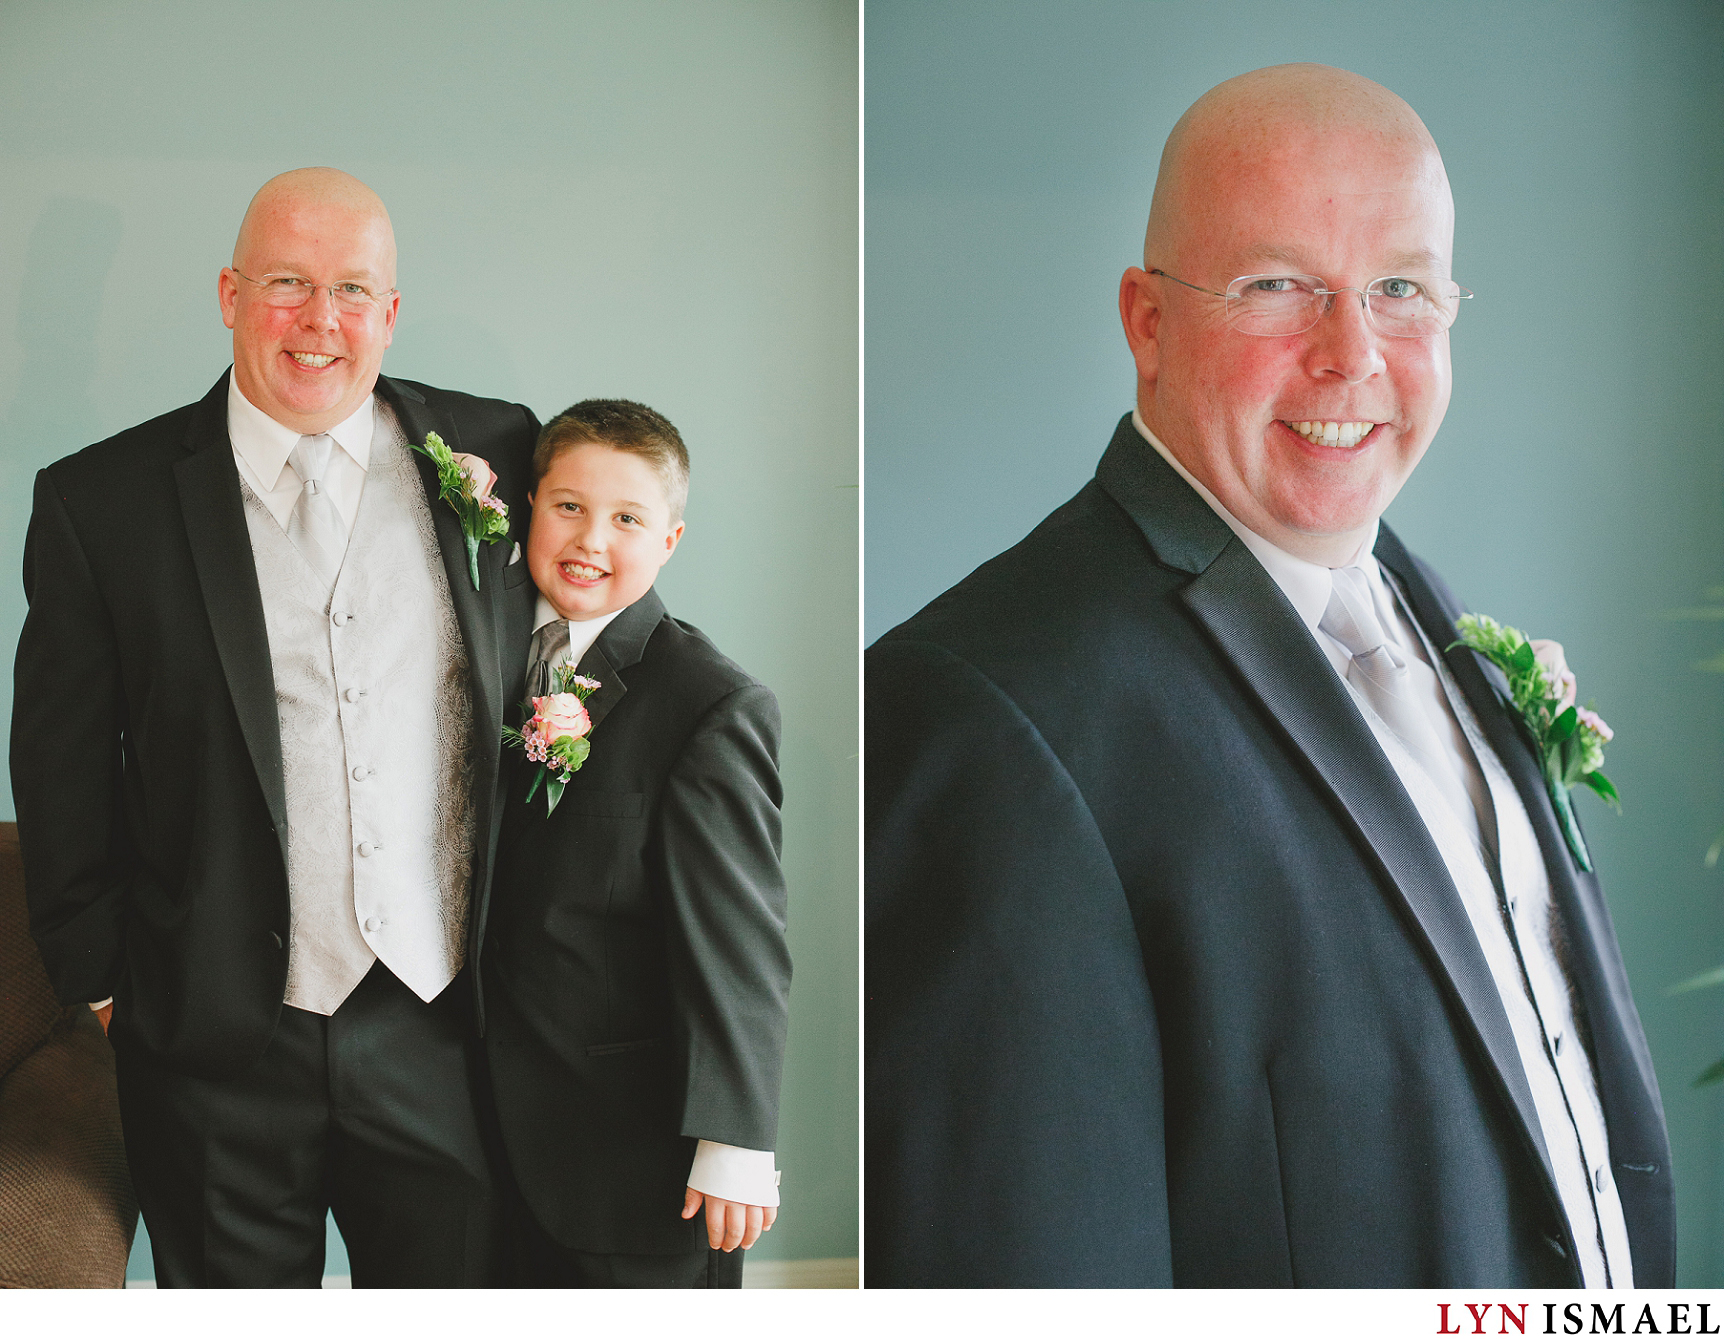 Portrait of the groom and his son.